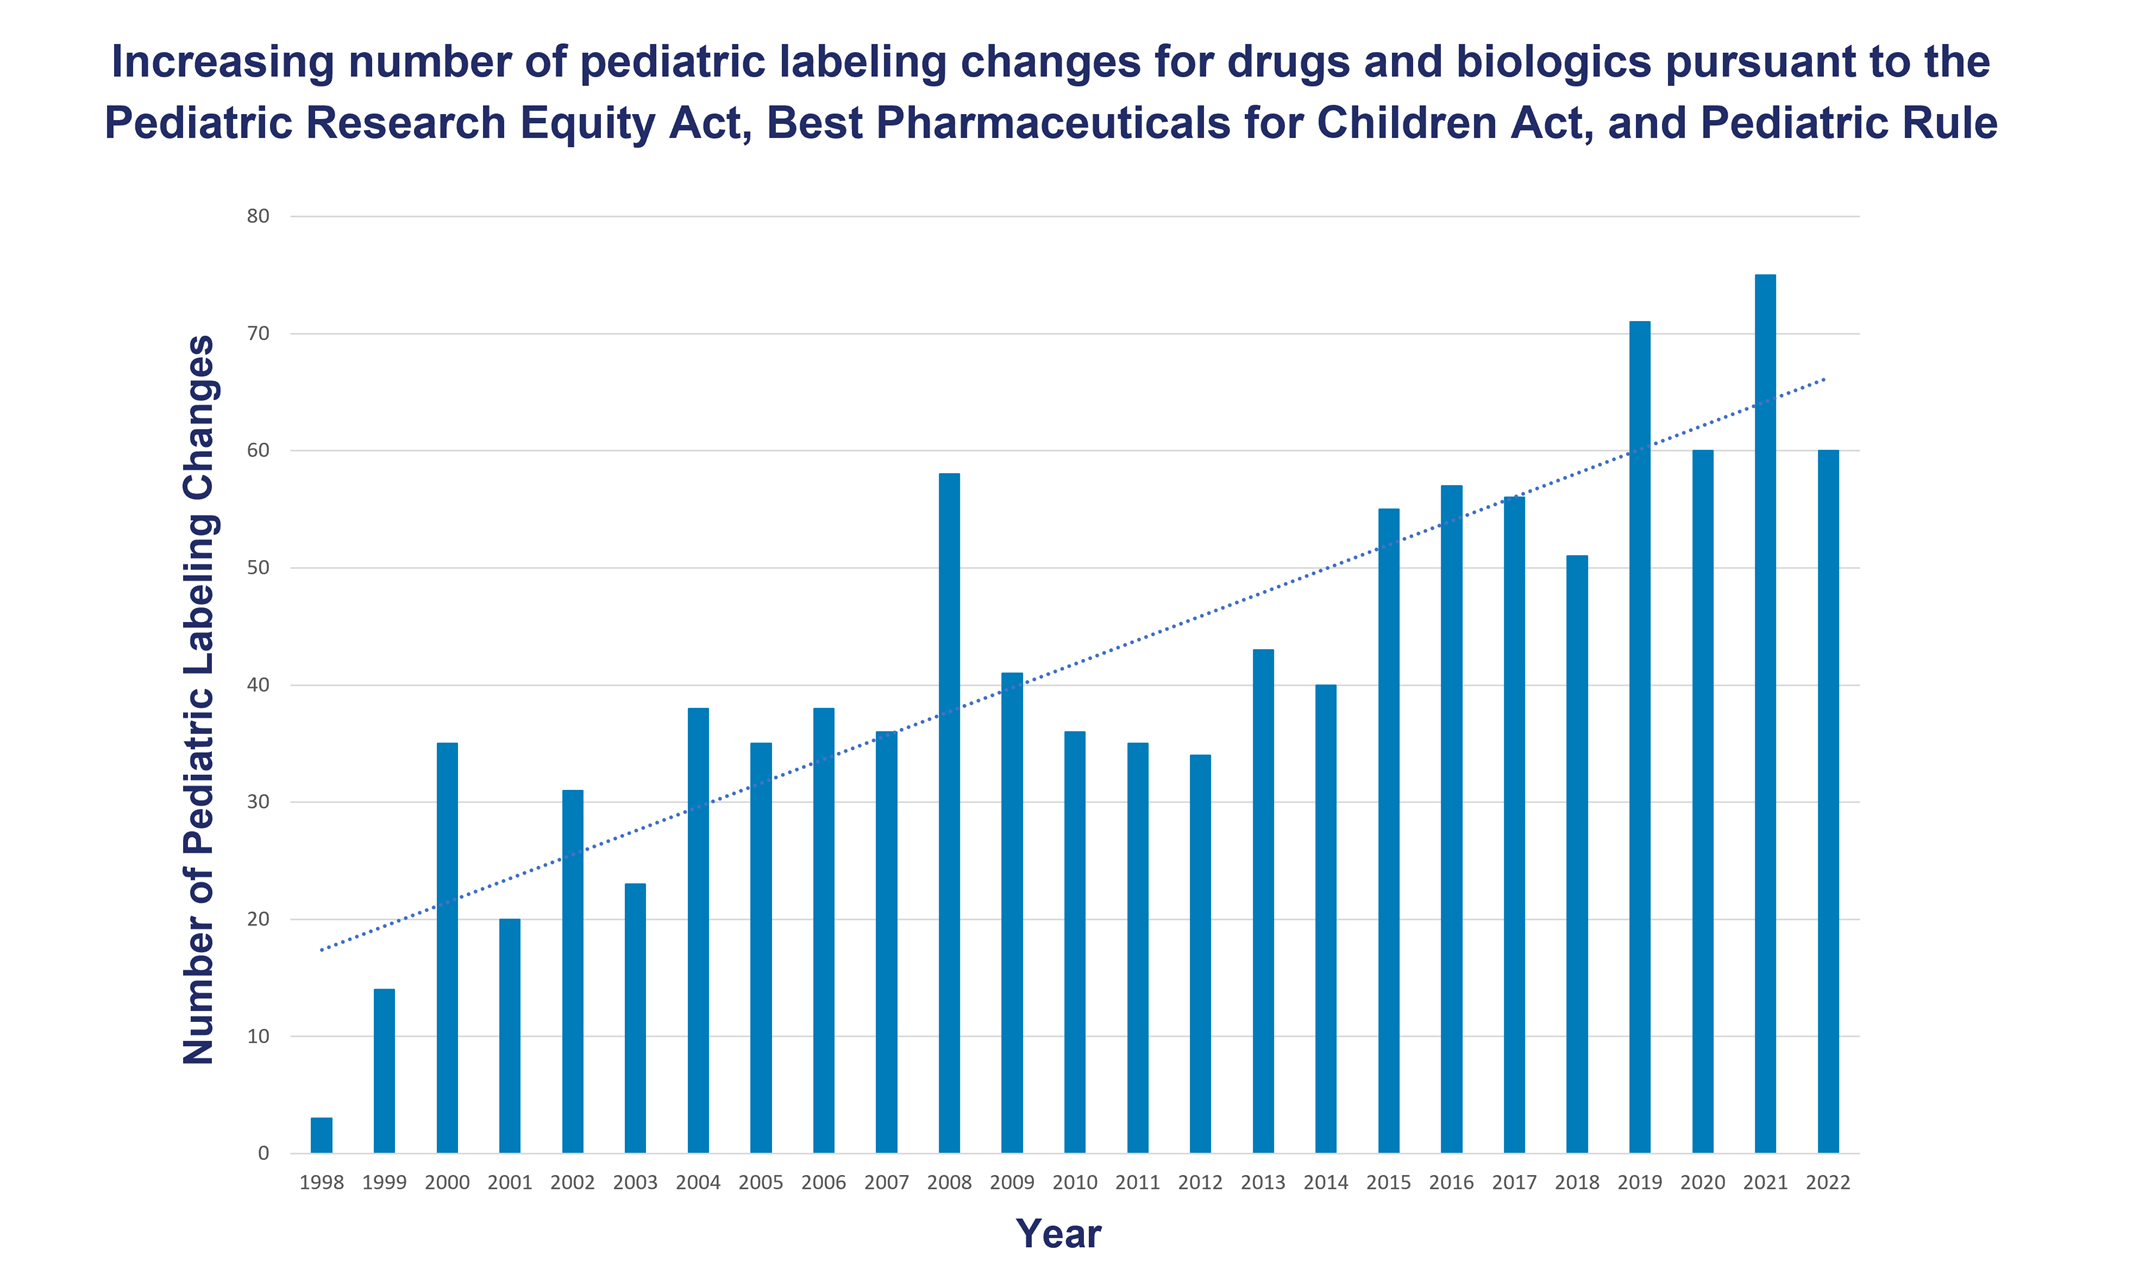 Bar graph illustrating the number of pediatric labeling changes (vertical axis) per year from 1998 through 2022 (horizontal axis) with a trend line indicating an overall increase in the number of pediatric labeling changes from 1998 to 2022.